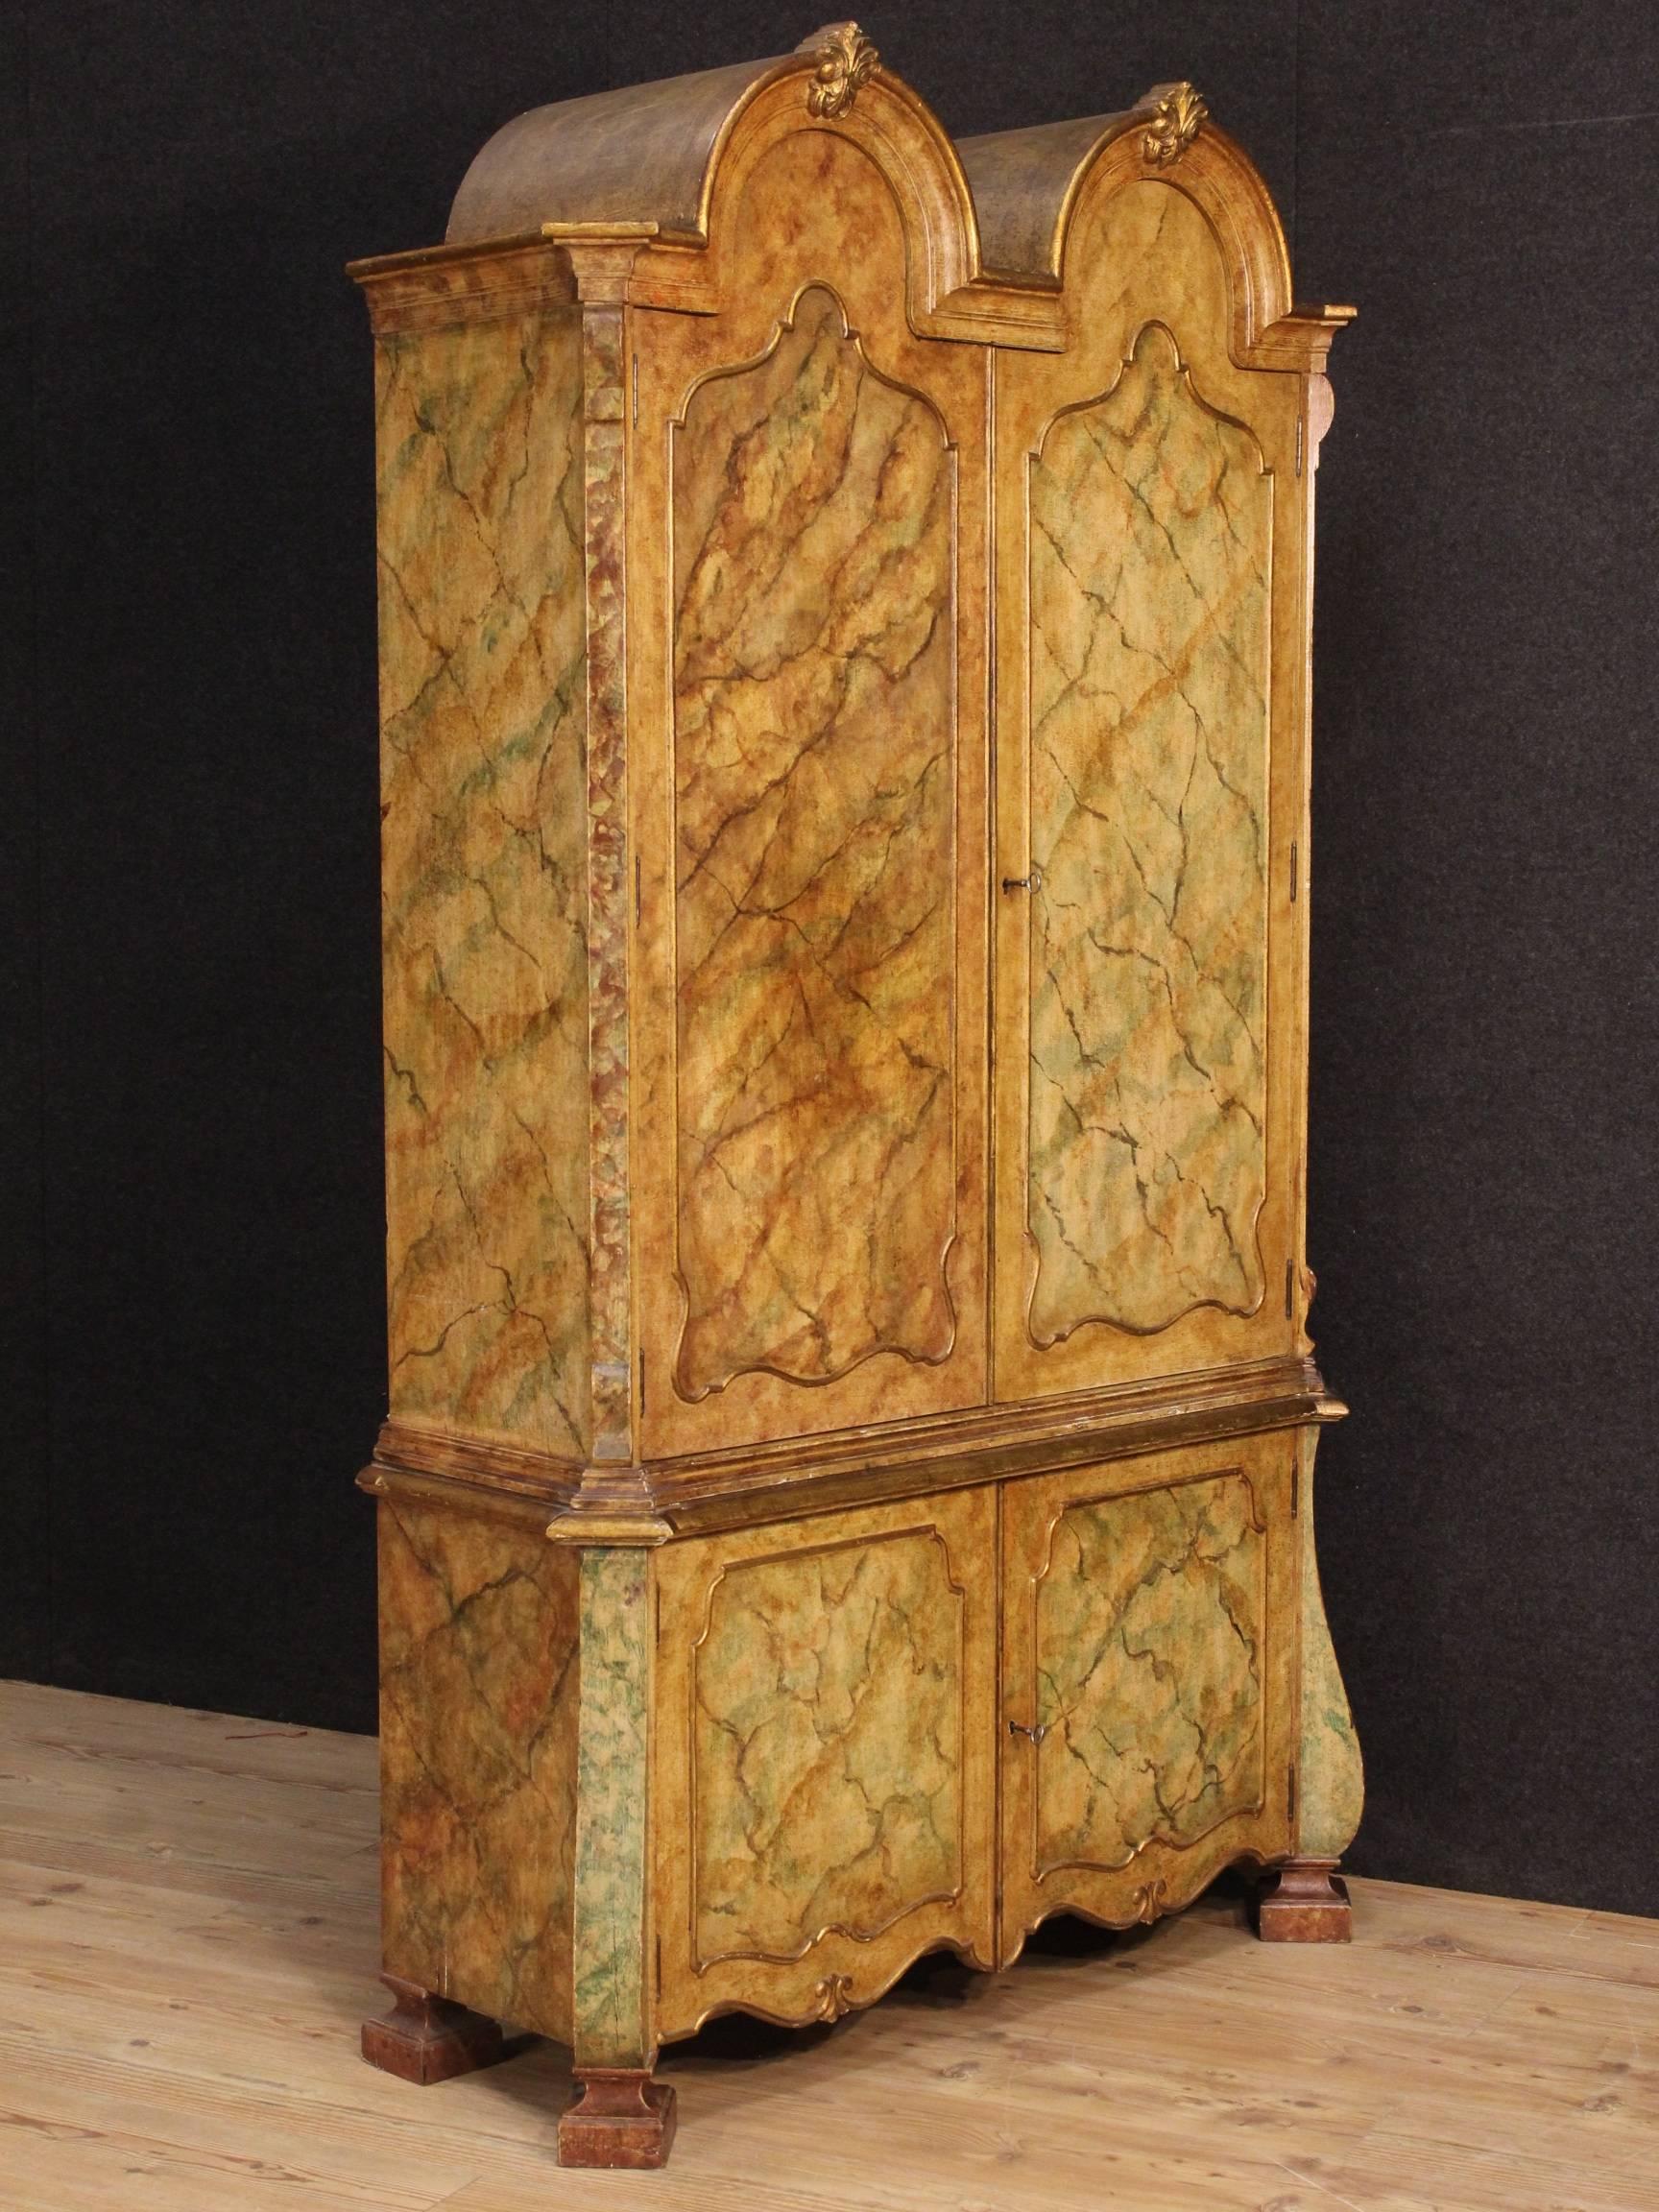 French wardrobe of the second half of the 20th century. Furniture in carved, gilded and lacquered faux marble wood of great taste and spectacular decor. Sideboard with four high capacity and service doors, complete with two working keys. Furniture